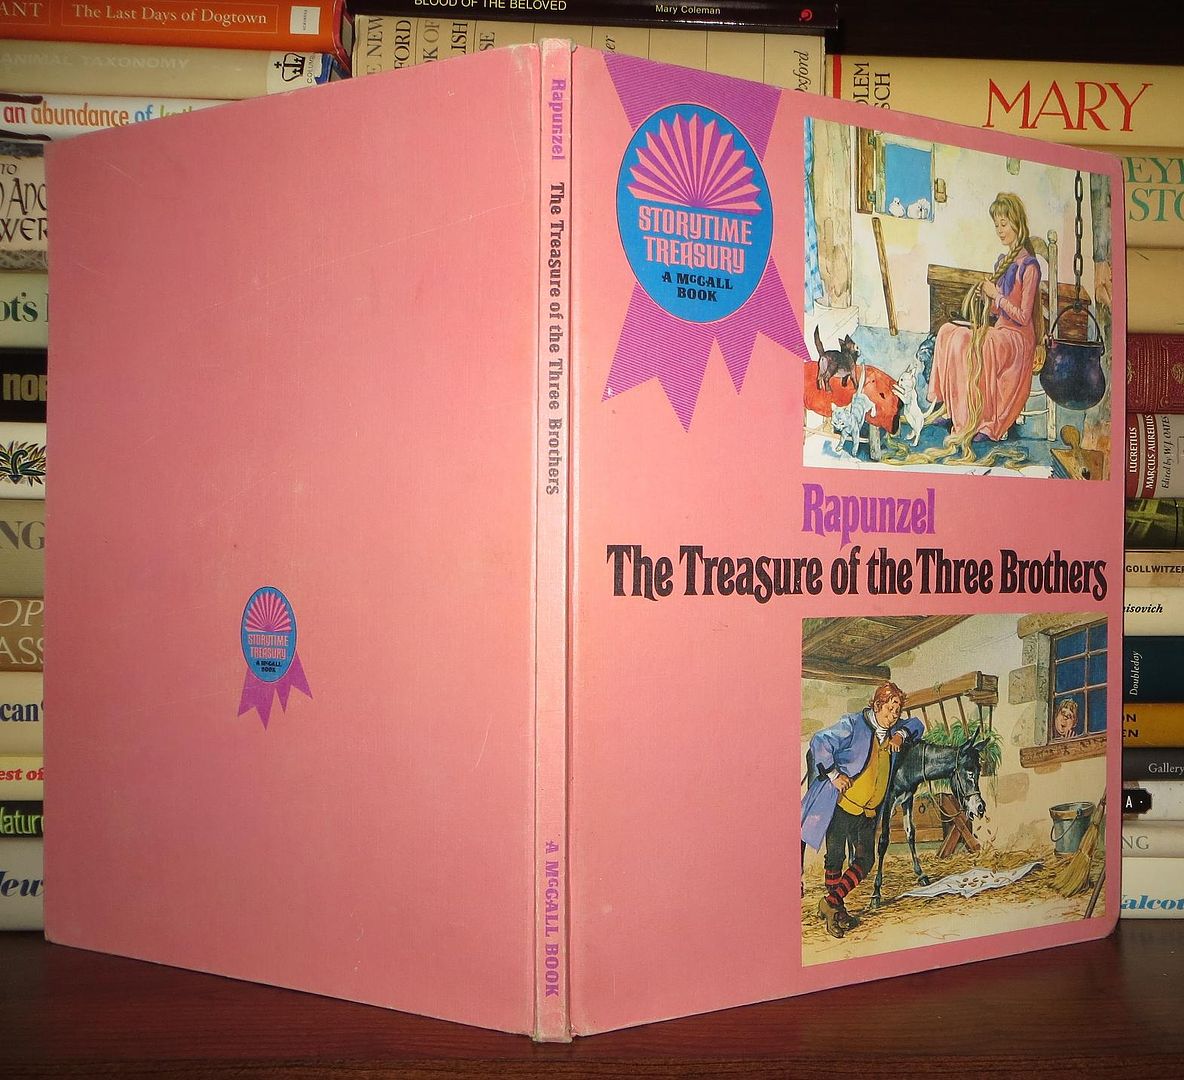 MCCALL PUBLISHING COMPANY - Rapunzel the Treasure of the Three Brothers